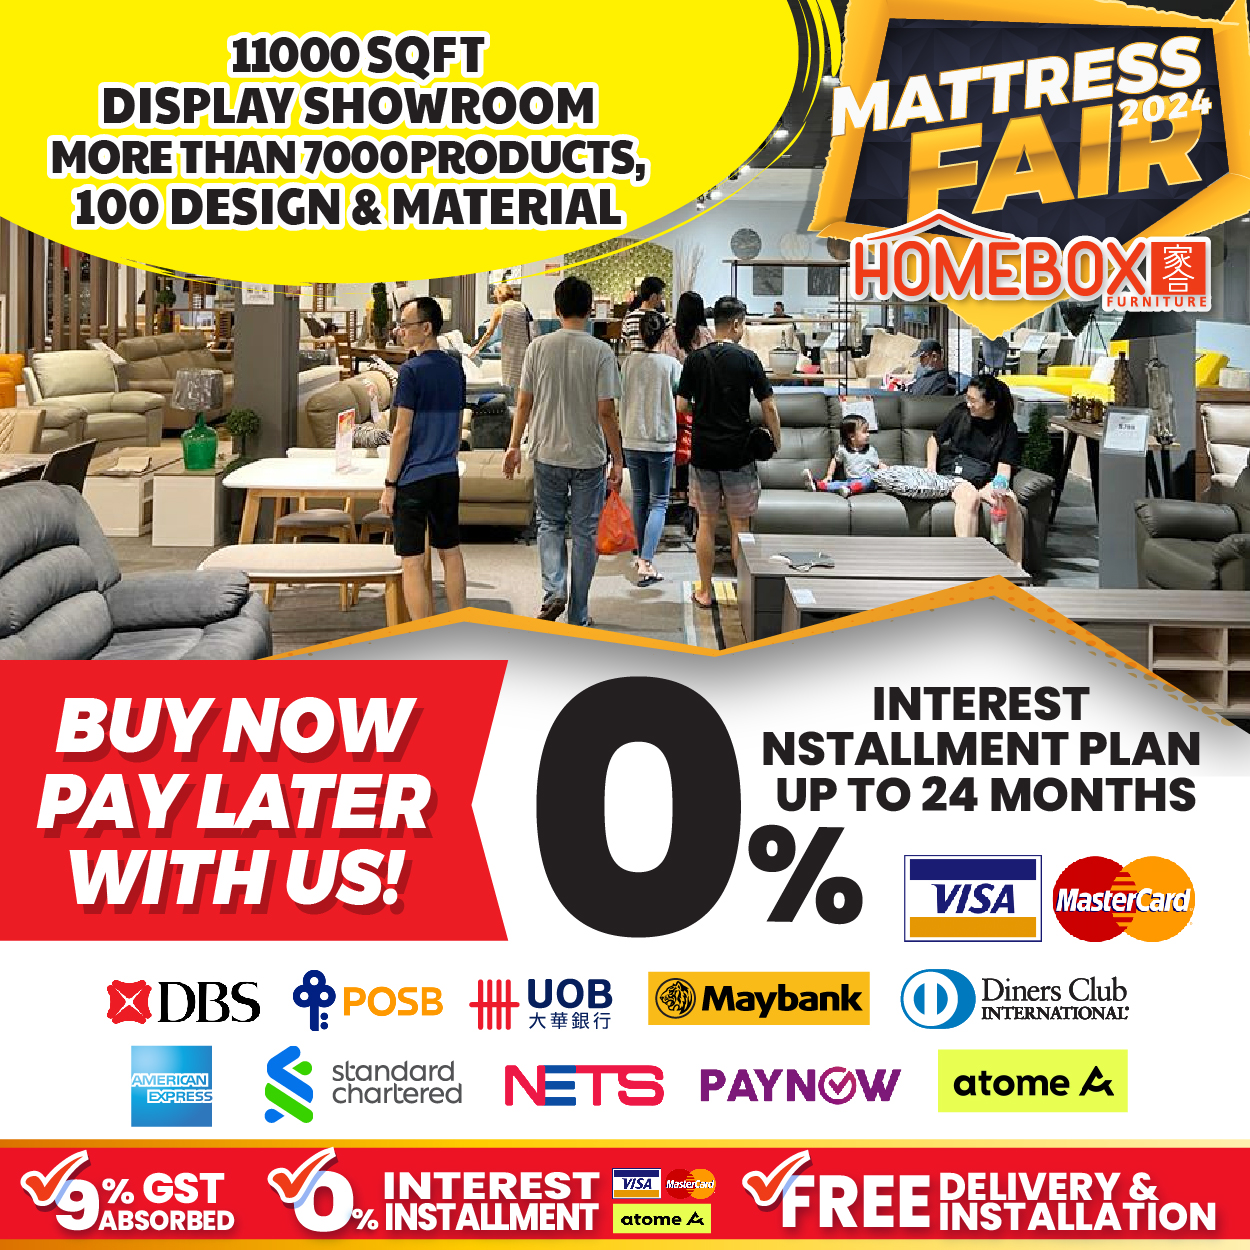 Lobang: Homebox's Biggest Mattress Fair in Aljunied Has Everything At Up To 80% Off From Now Till 5 May 24. Get A Free Mattres Upgrade During The Sale! - 27